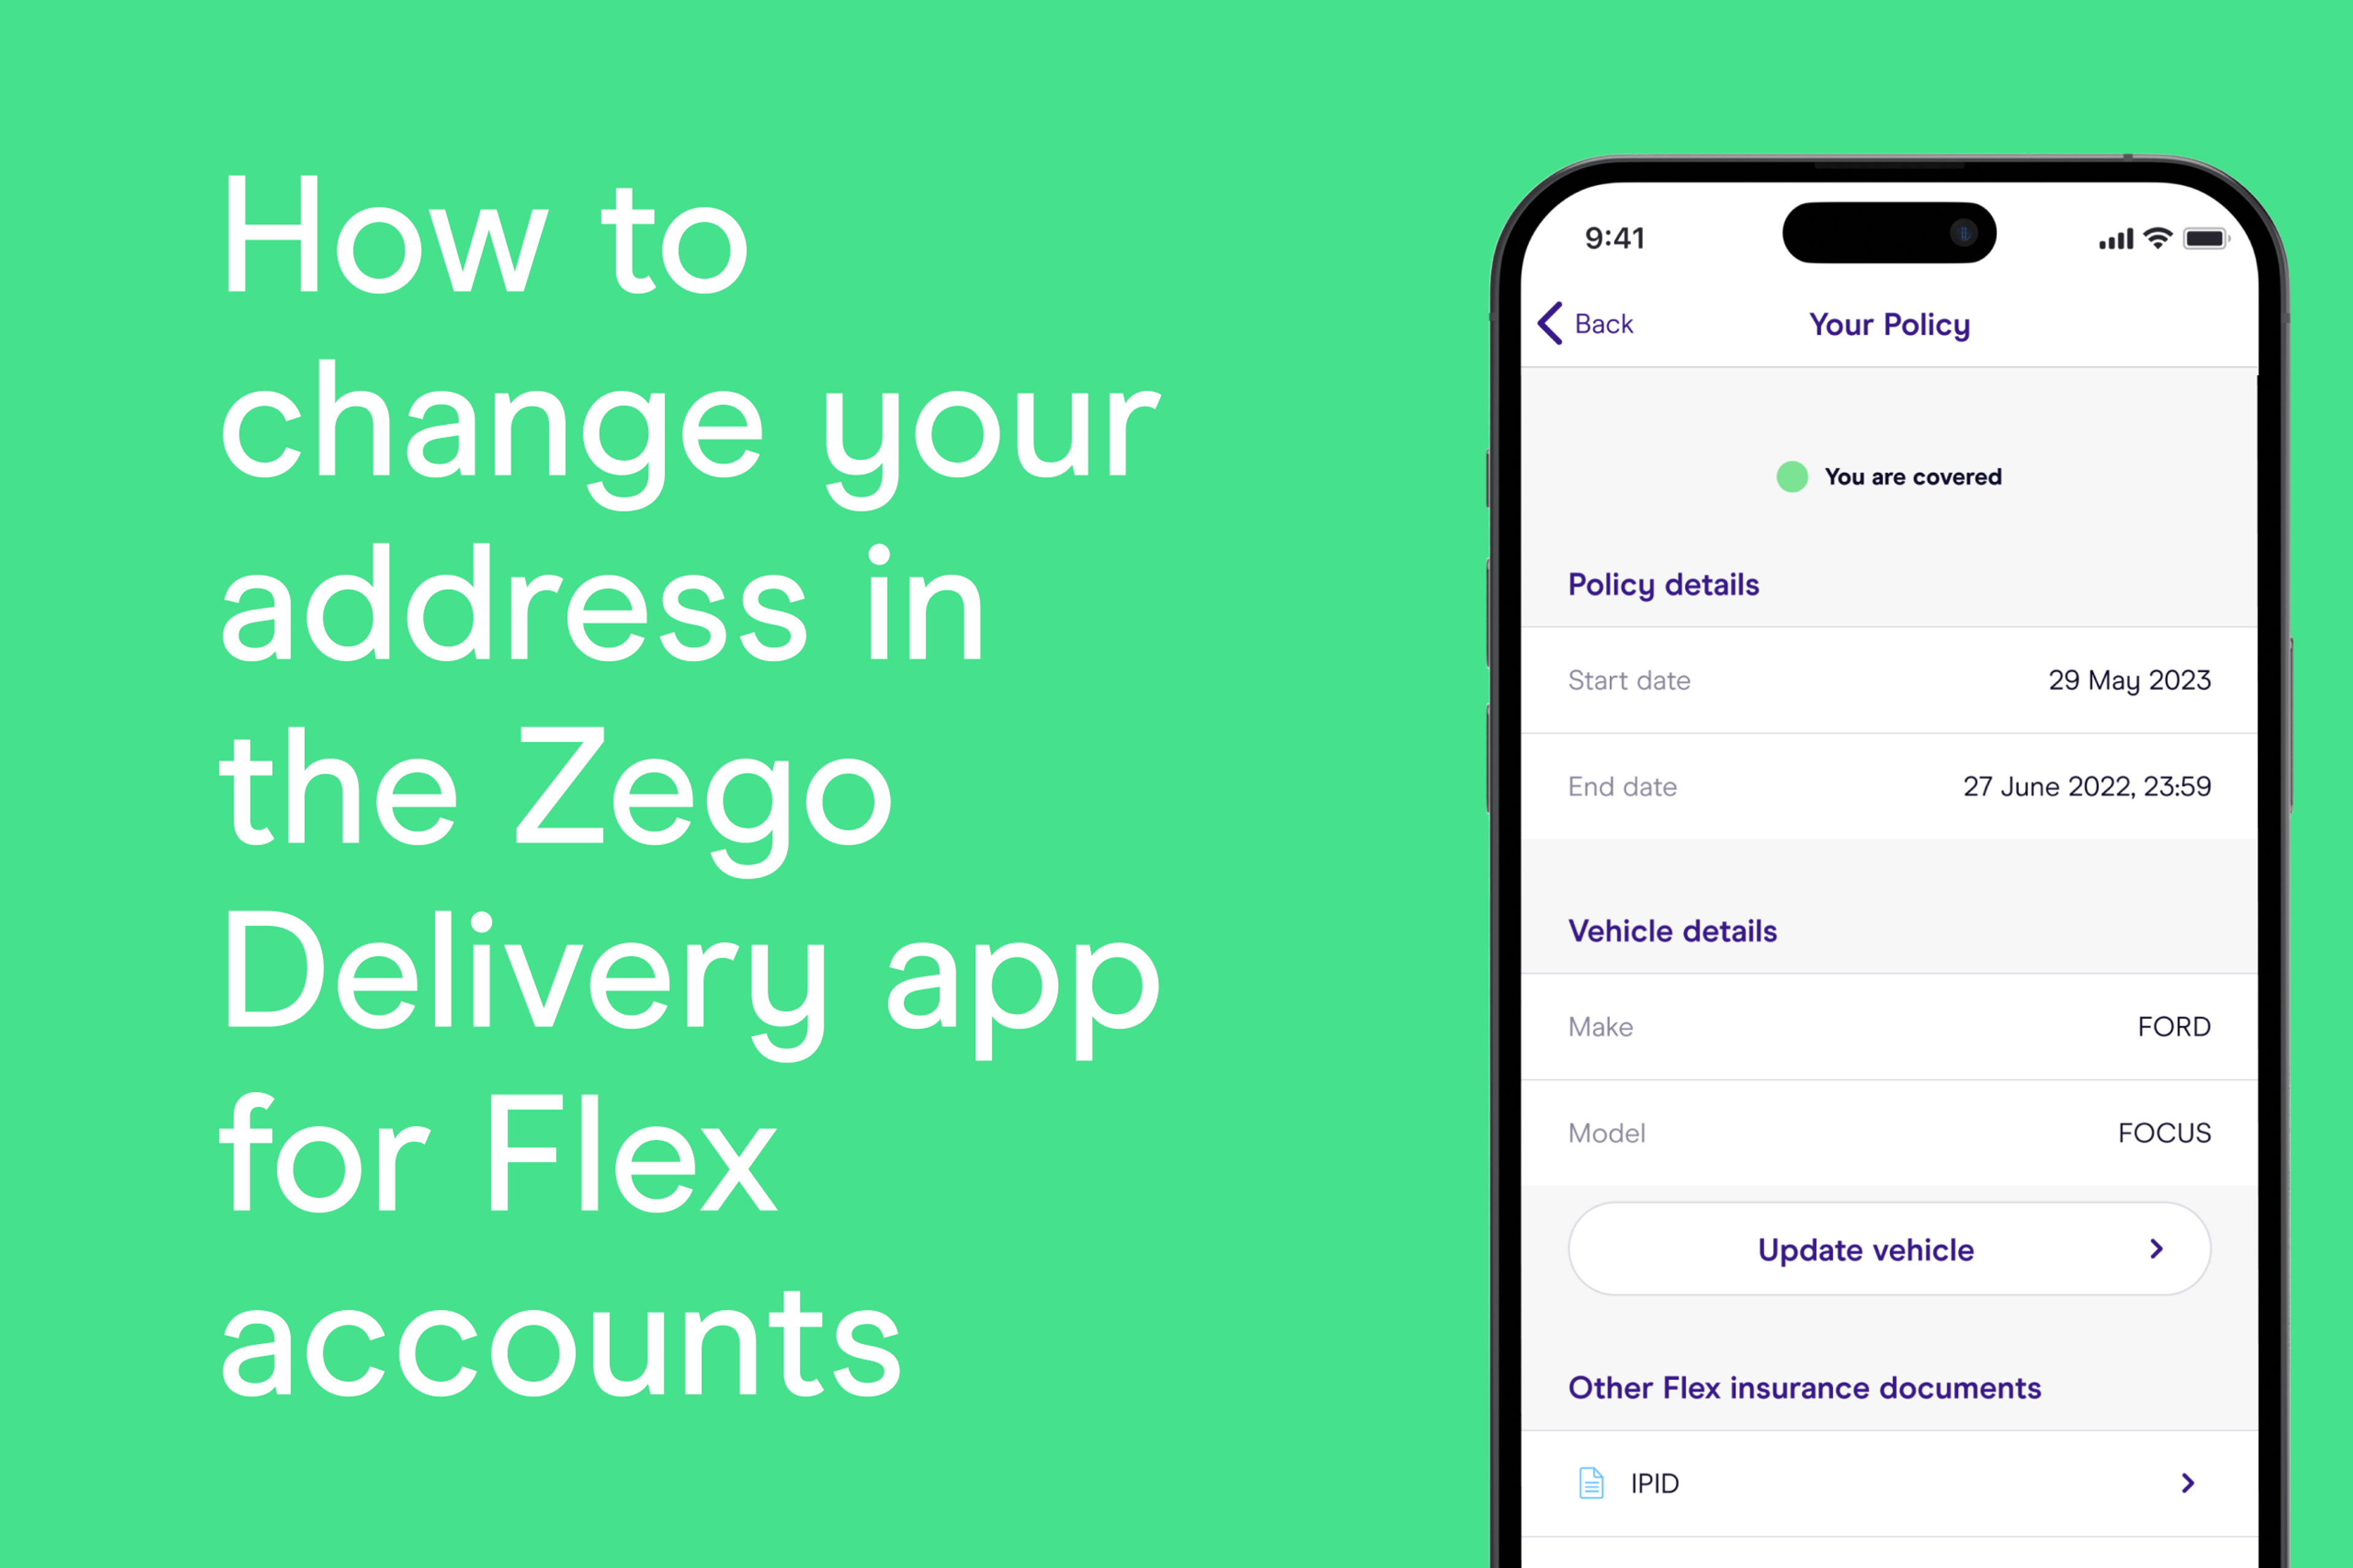 How to change your address in the Zego Delivery app